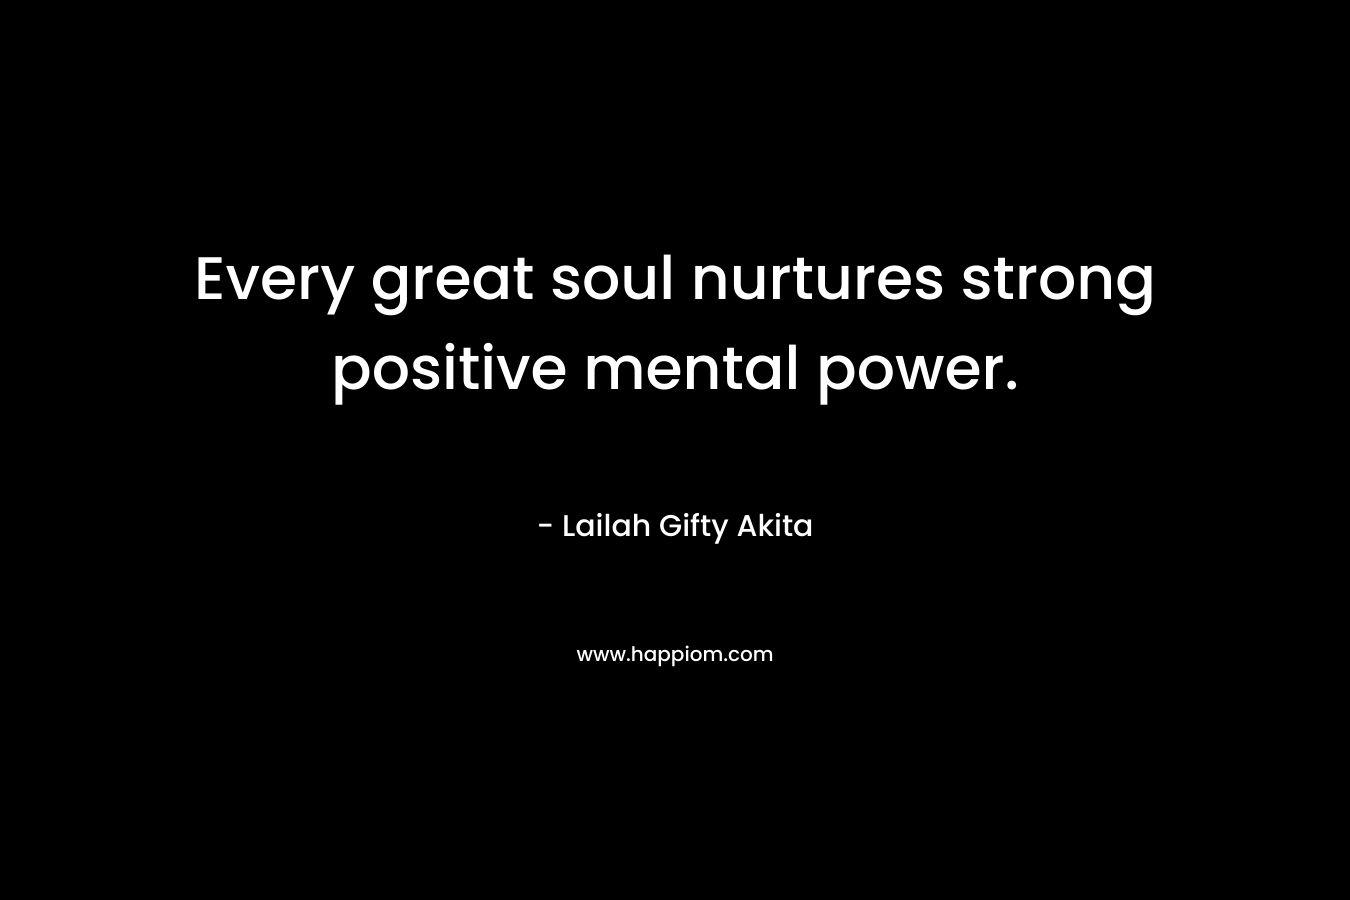 Every great soul nurtures strong positive mental power.